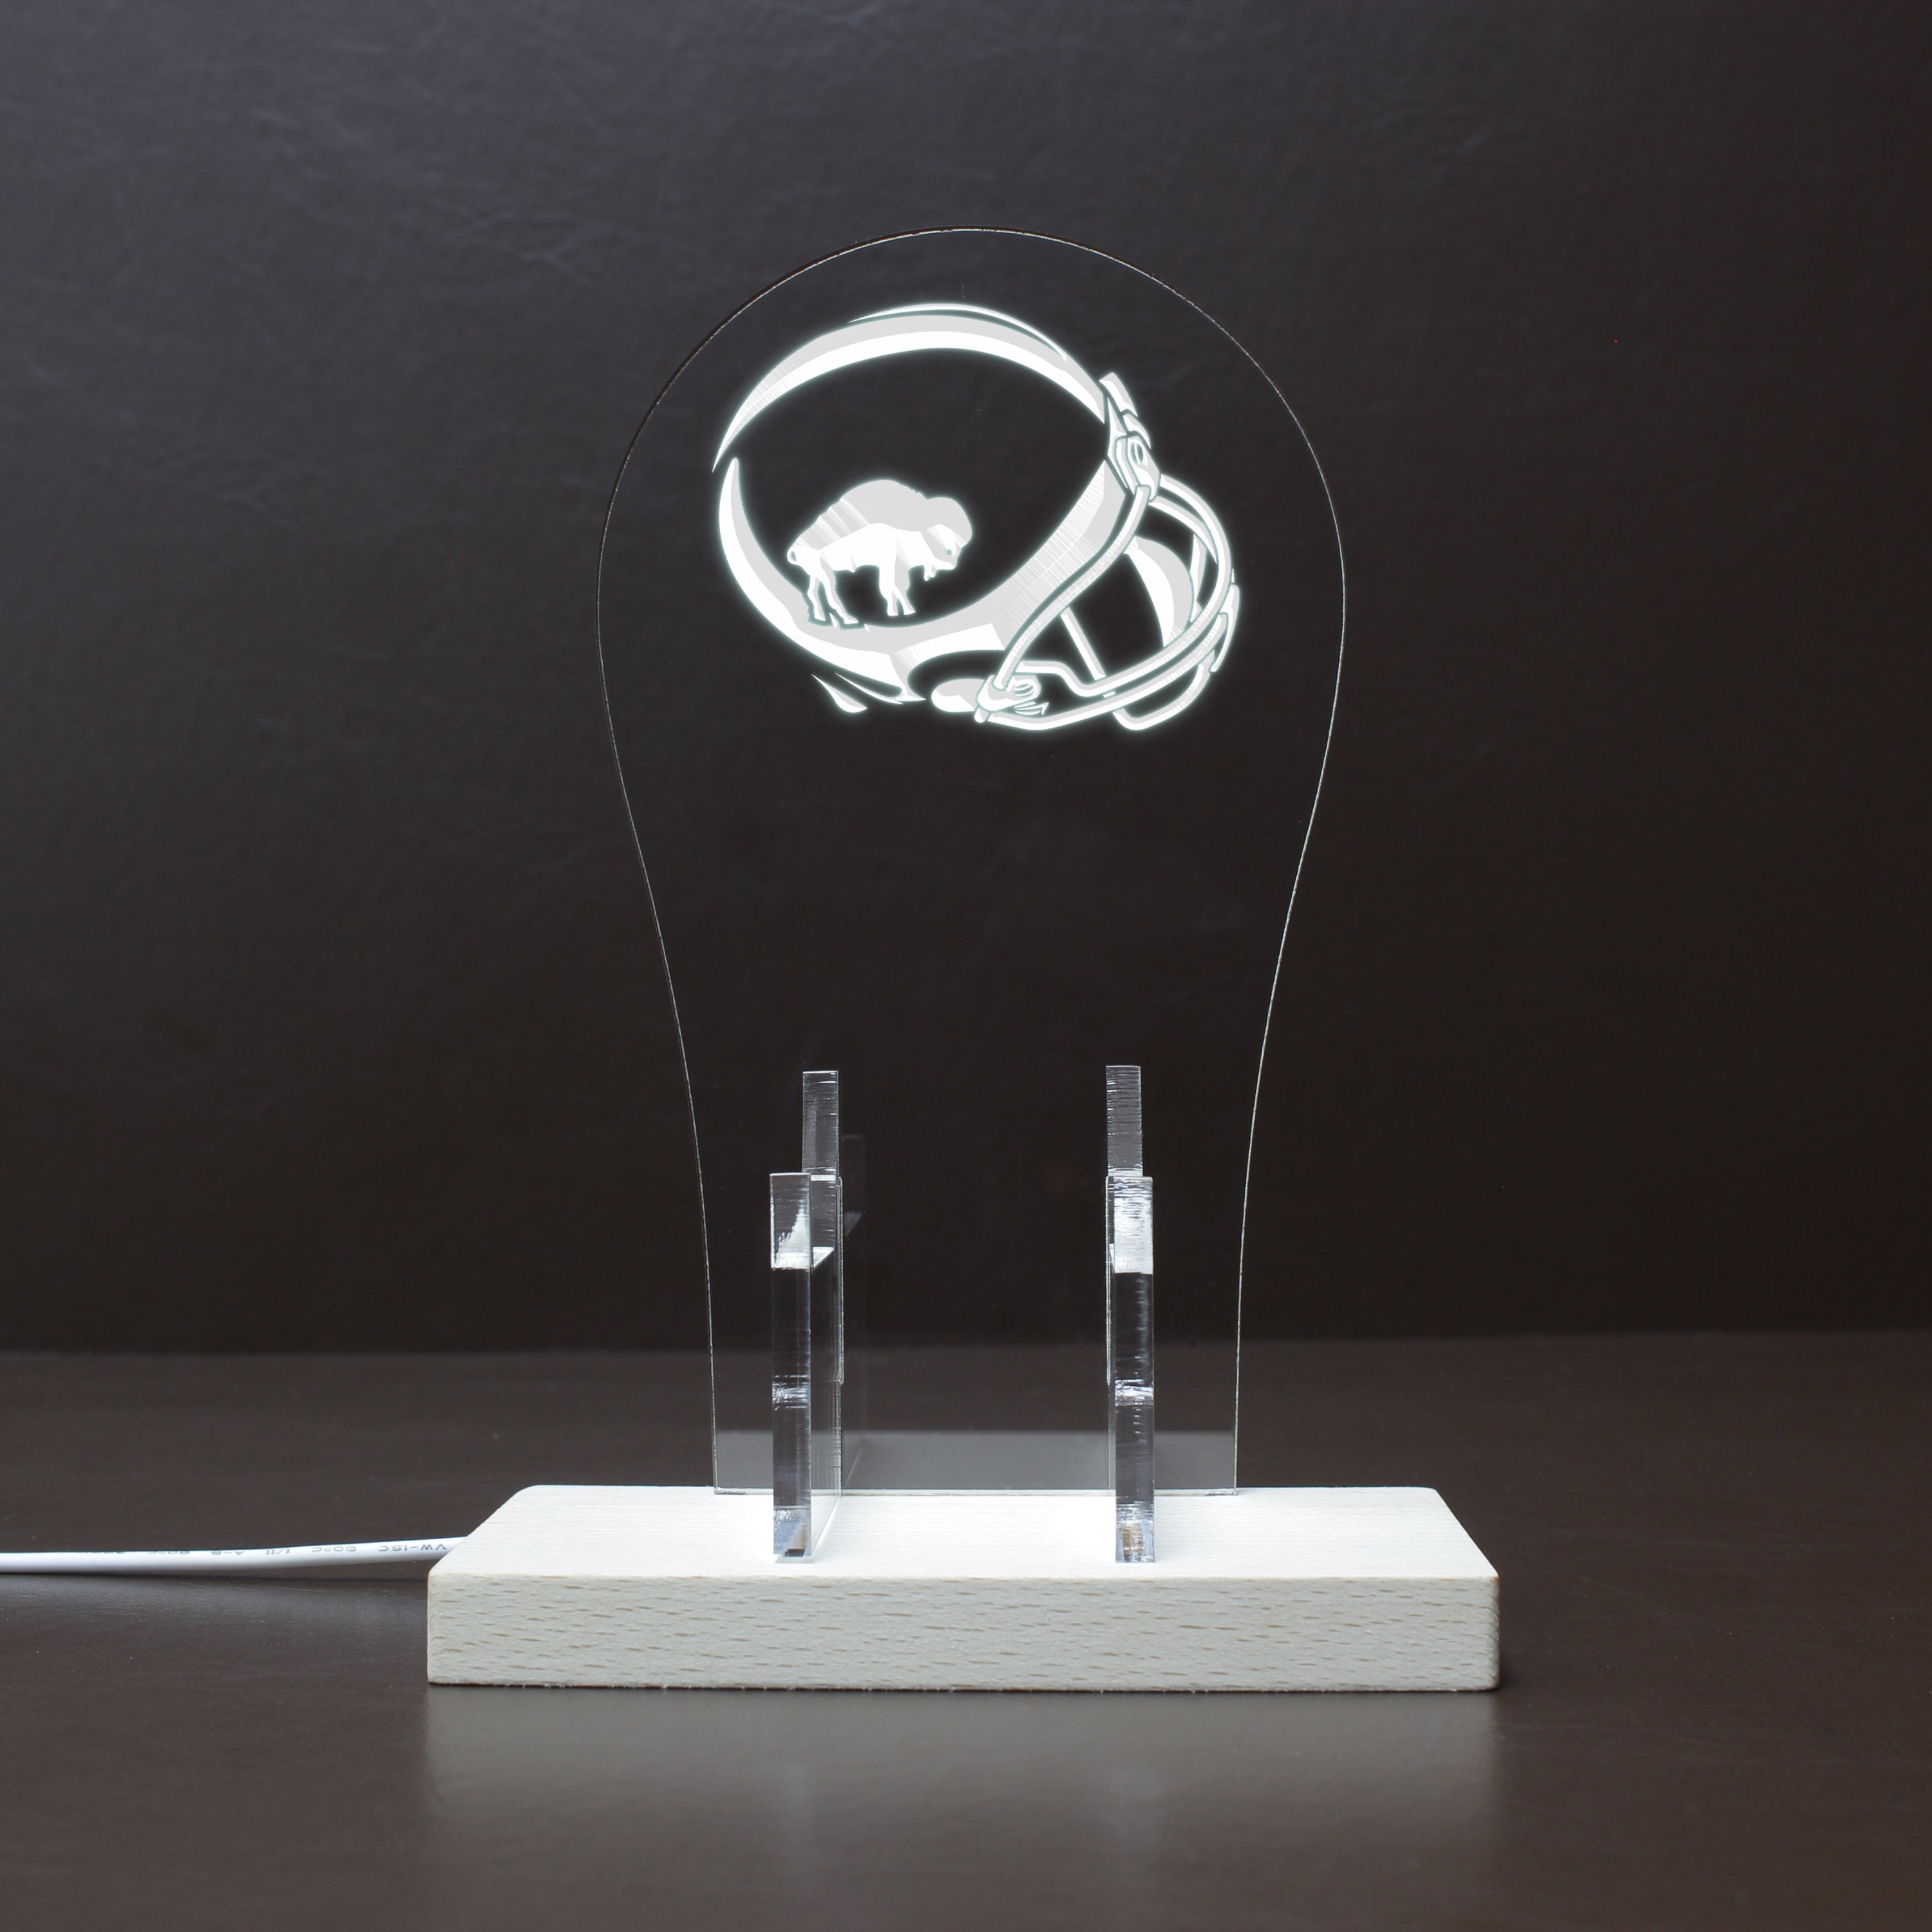 Buffalo Bills helmet logo in use from 1965-1973 RGB LED Gaming Headset Controller Stand